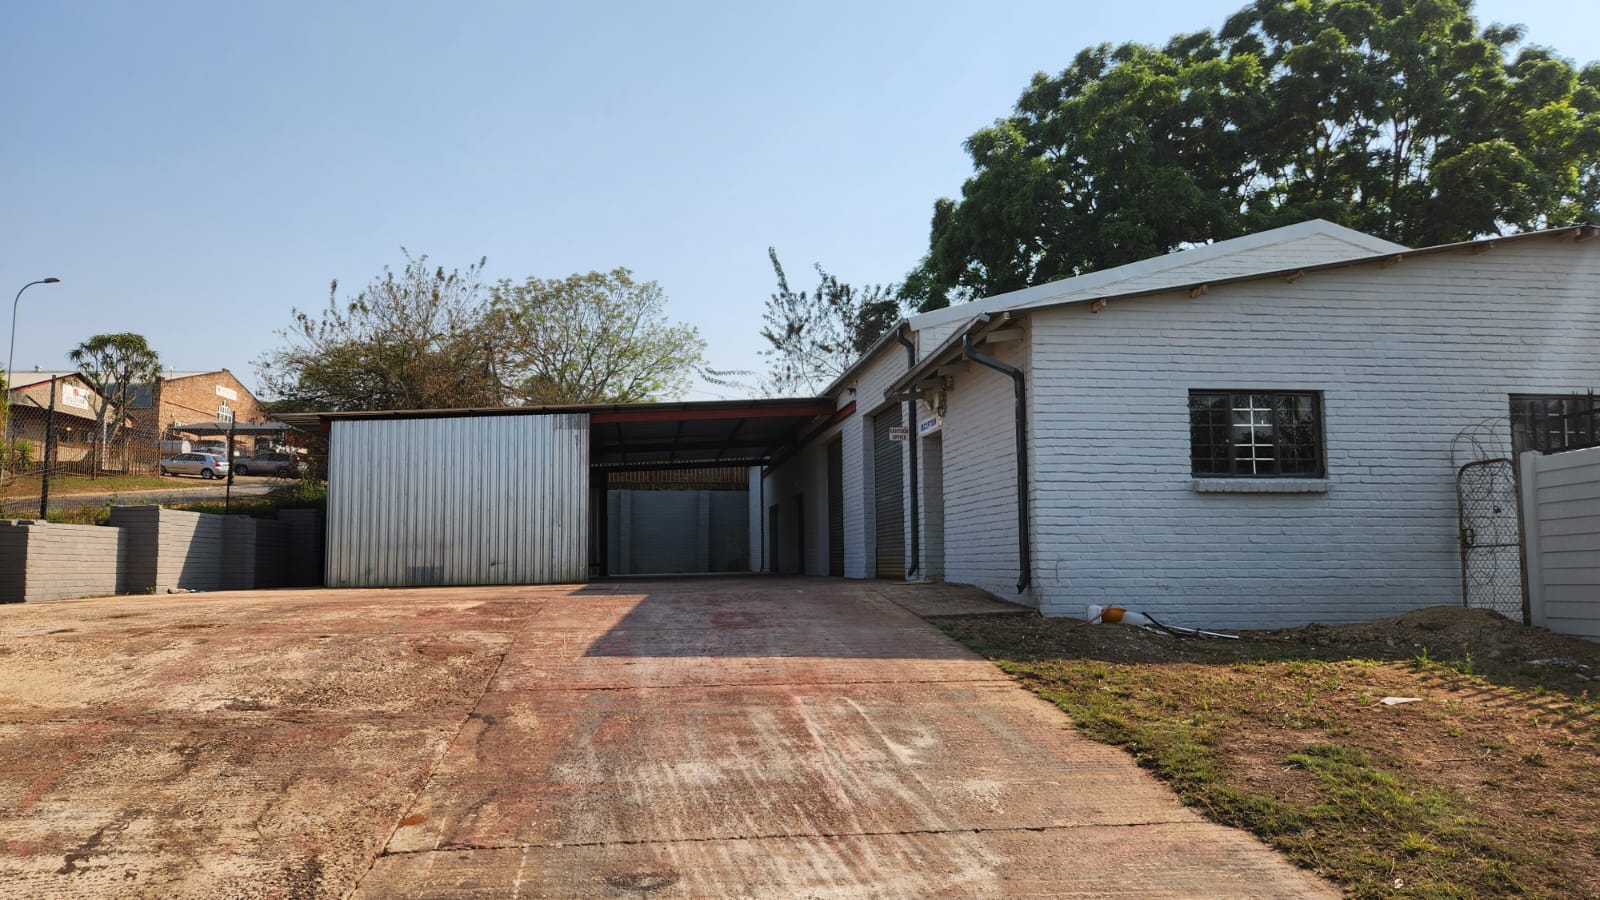 Commercial property to rent in White River Ext 6 - 19 Indus, White River Ext 8 Mpumalanga